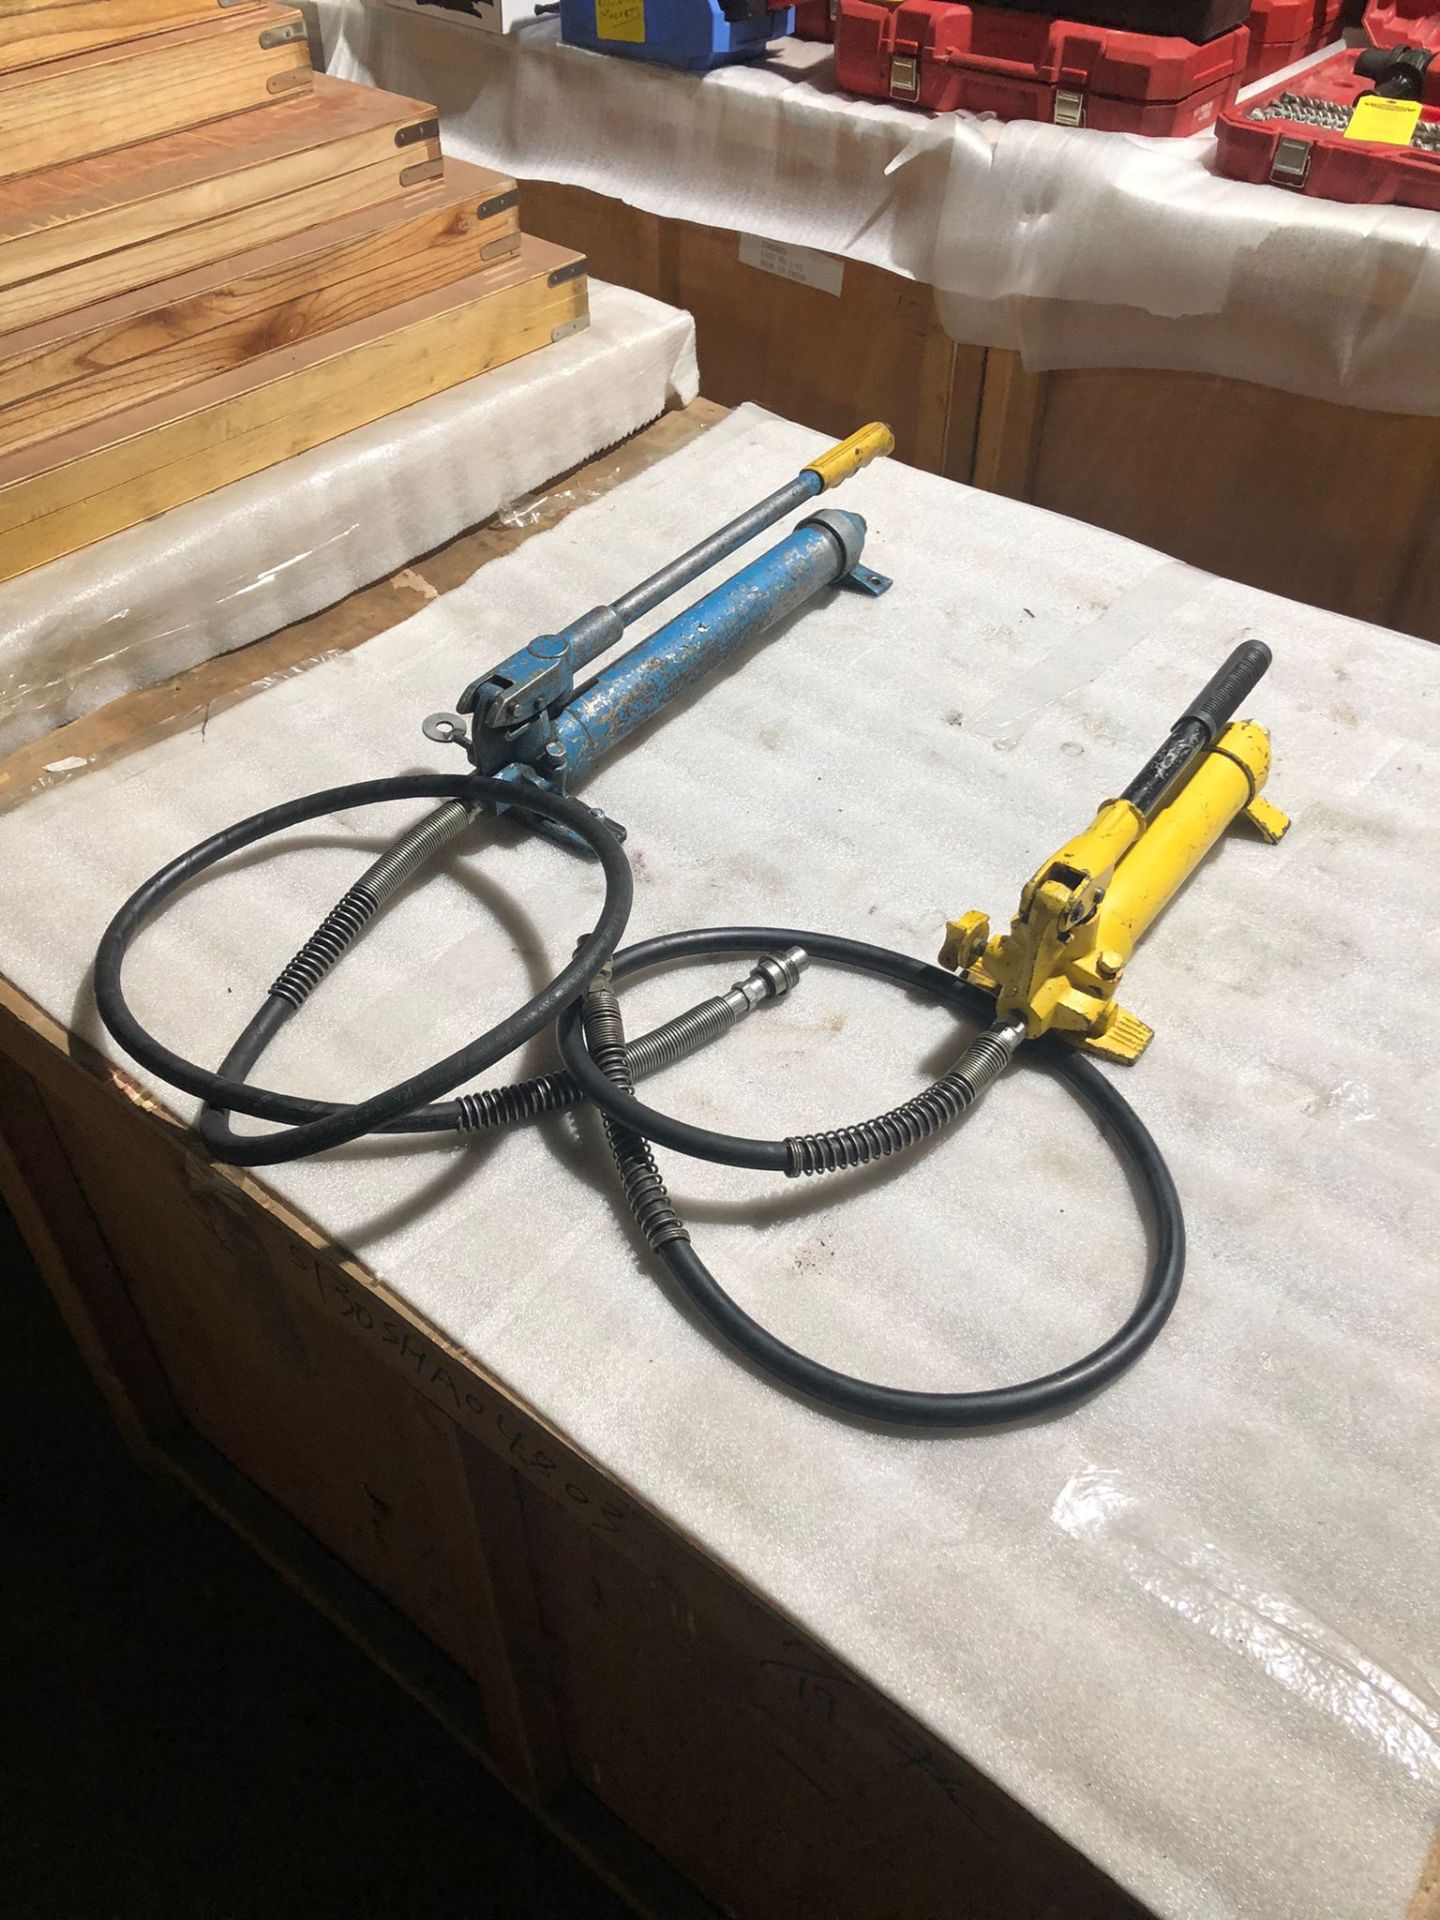 Lot of 2 (2 units) Enerpac Hand Pumps *** FROM 5-STAR RIGGING - Image 2 of 2